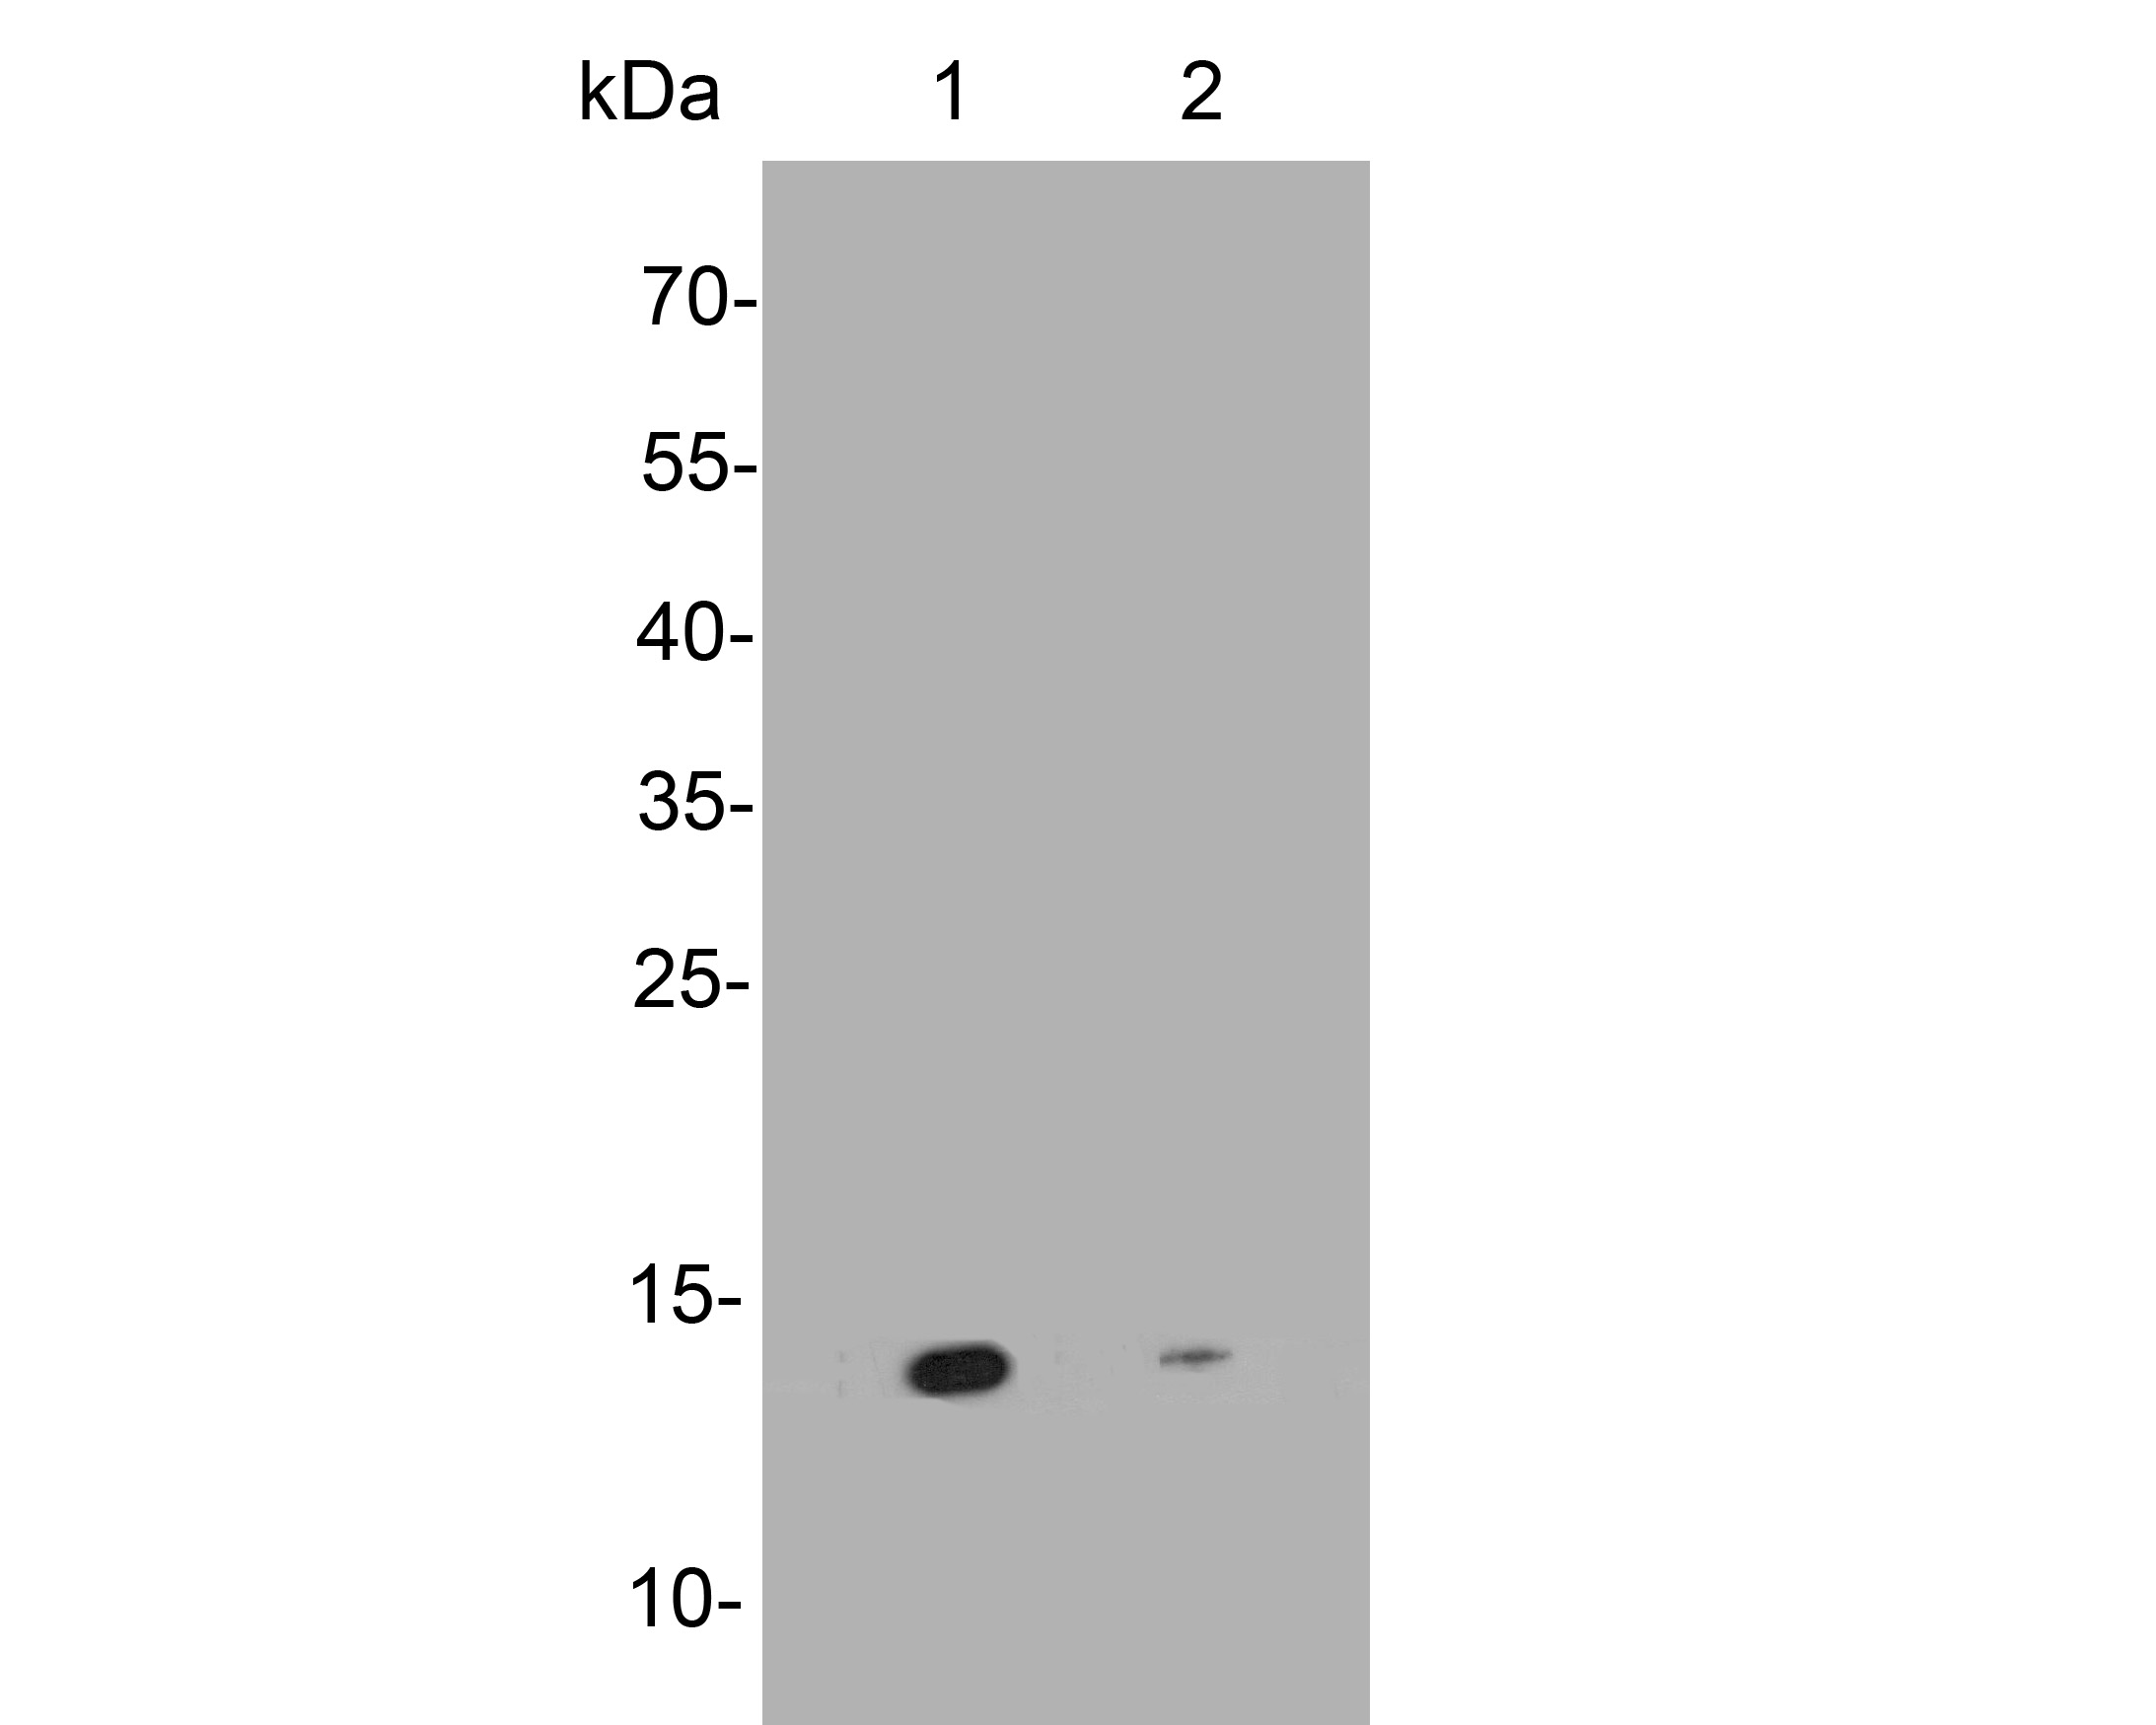 Western blot analysis of SNRPD3 on different lysates. Proteins were transferred to a PVDF membrane and blocked with 5% NFDM/TBST for 1 hour at room temperature. The primary antibody (HA500254, 1/500) was used in 5% NFDM/TBST at room temperature for 2 hours. Goat Anti-Rabbit IgG - HRP Secondary Antibody (HA1001) at 1:200,000 dilution was used for 1 hour at room temperature.<br />
Positive control: <br />
Lane 1: Jurkat cell lysate<br />
Lane 2: mouse lung tissue lysate